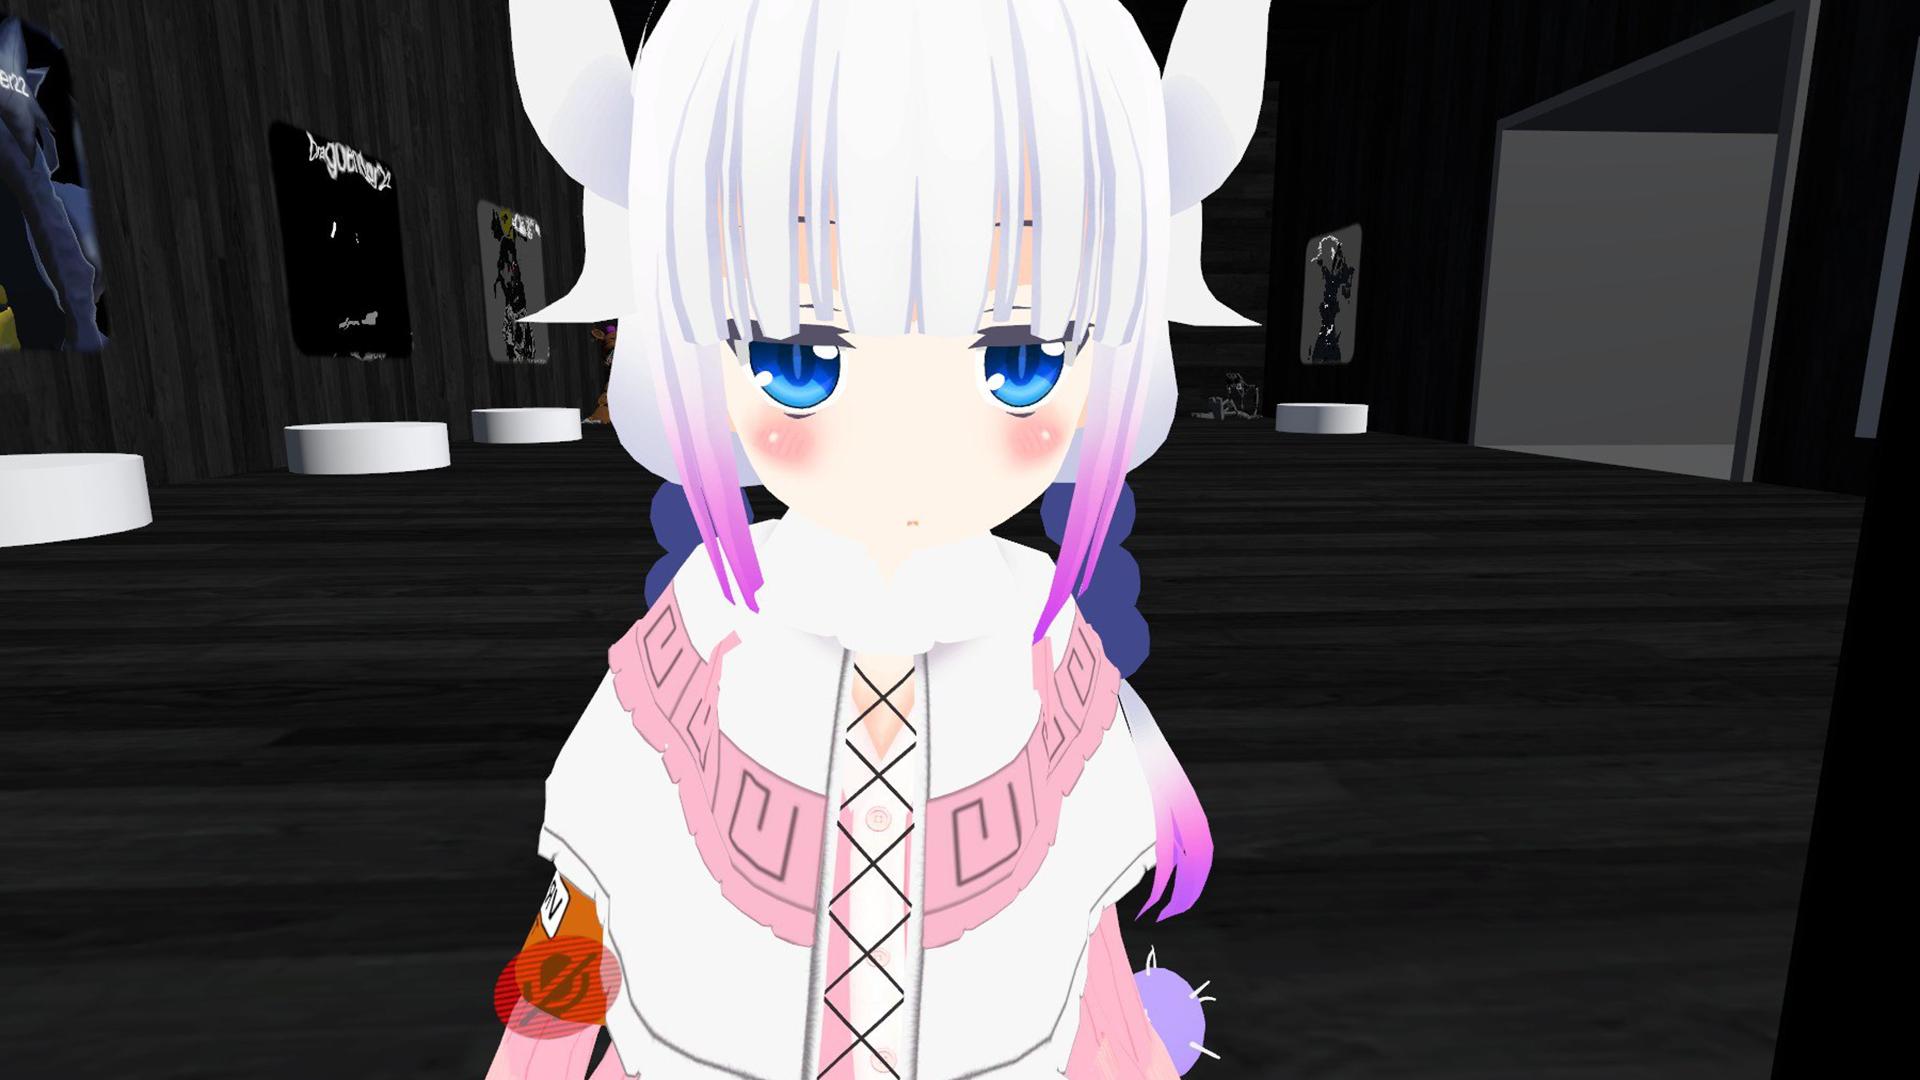 Cute Girl For Vrchat Avatars For Android Apk Download.